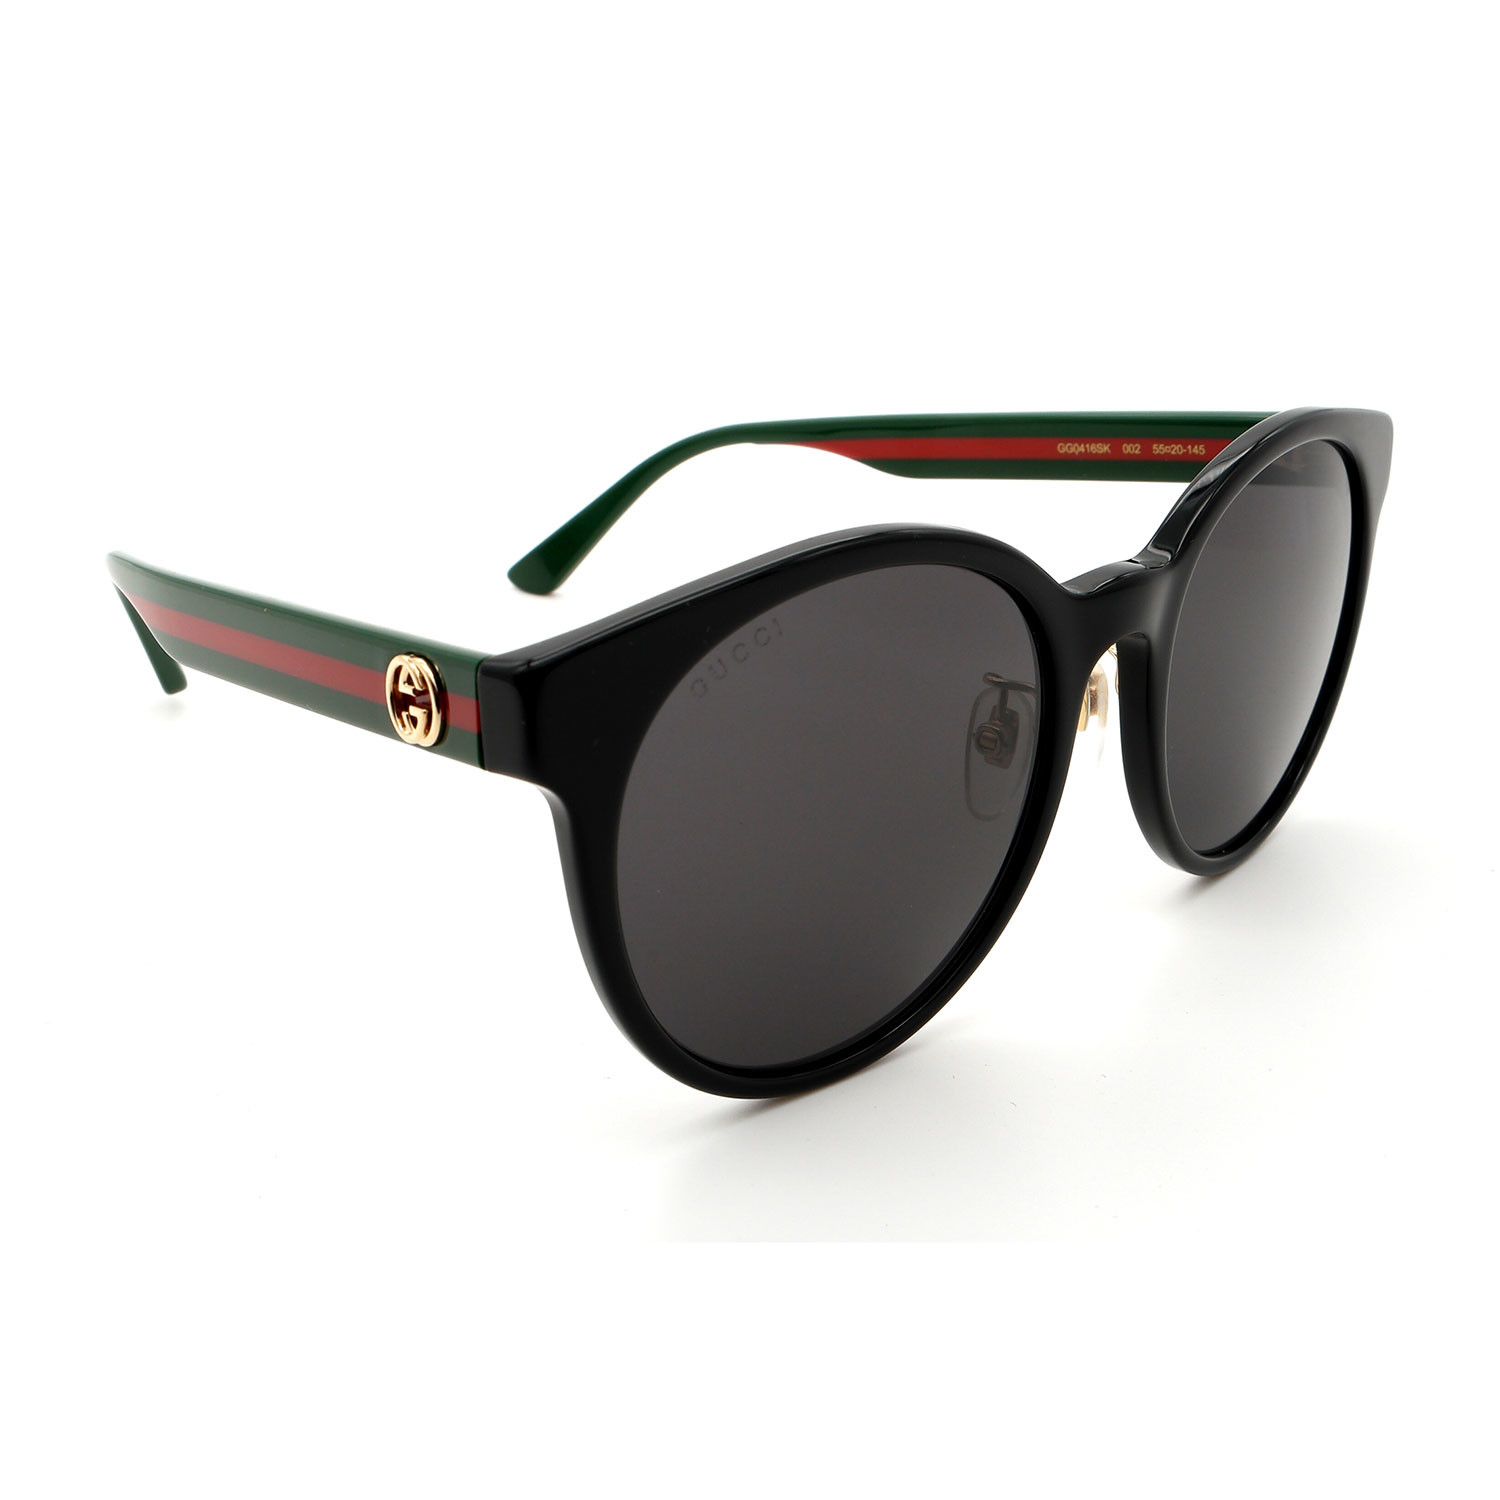 Unisex GG0416SK Round Sunglasses // Black + Gray - Gucci - Touch of Modern